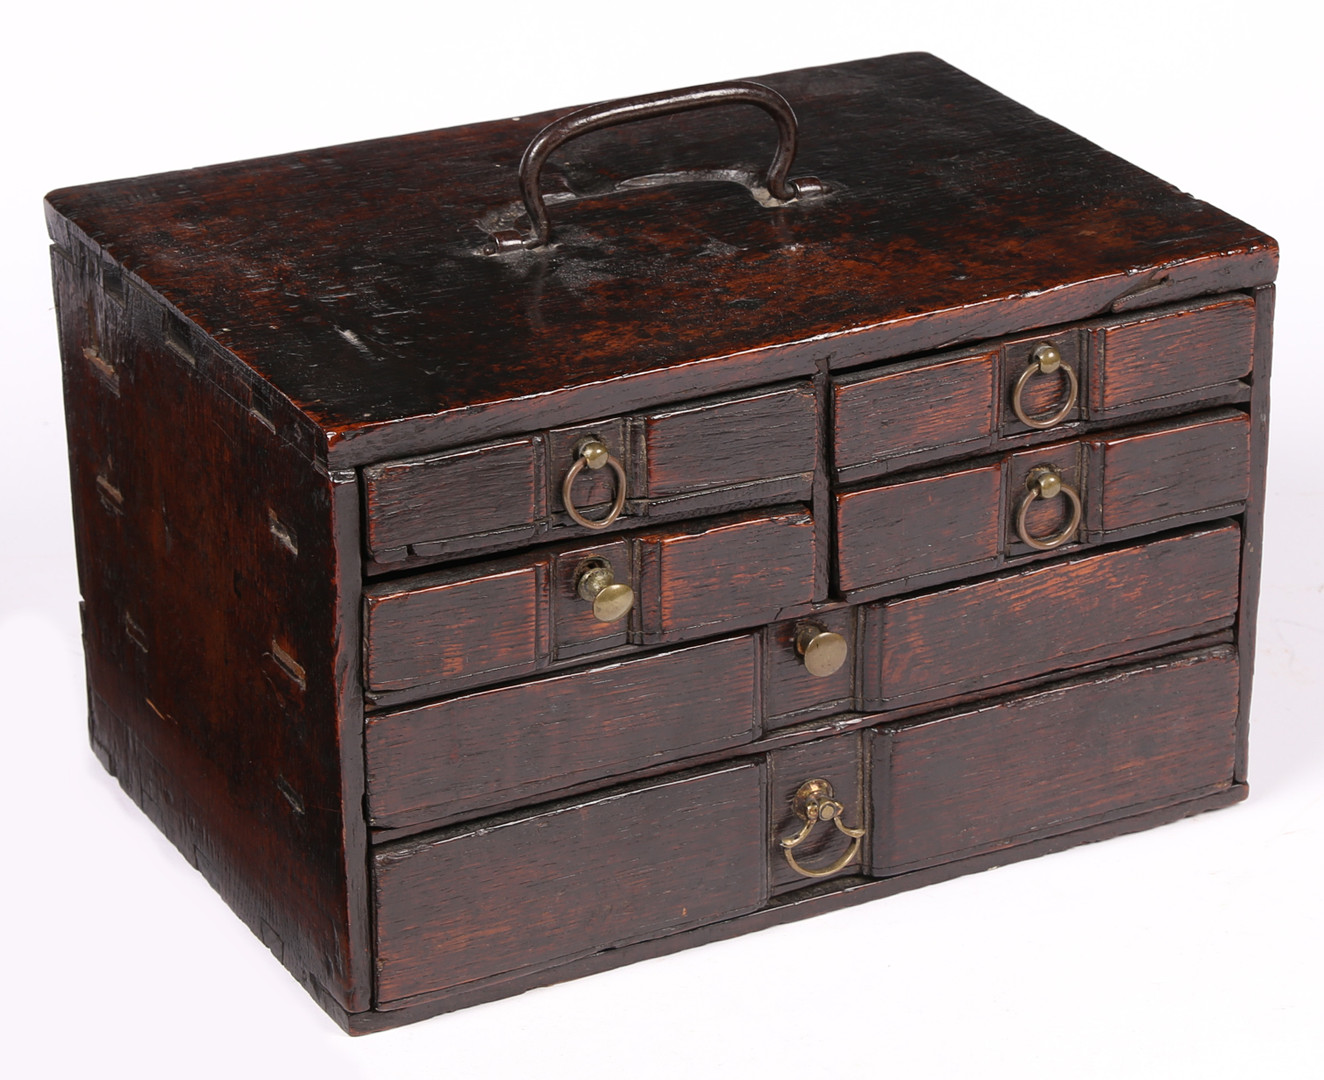 AN UNUSUAL SMALL BOARDED OAK TABLE-TOP CHEST OF DRAWERS, ENGLISH, CIRCA 1700-20. - Image 2 of 5